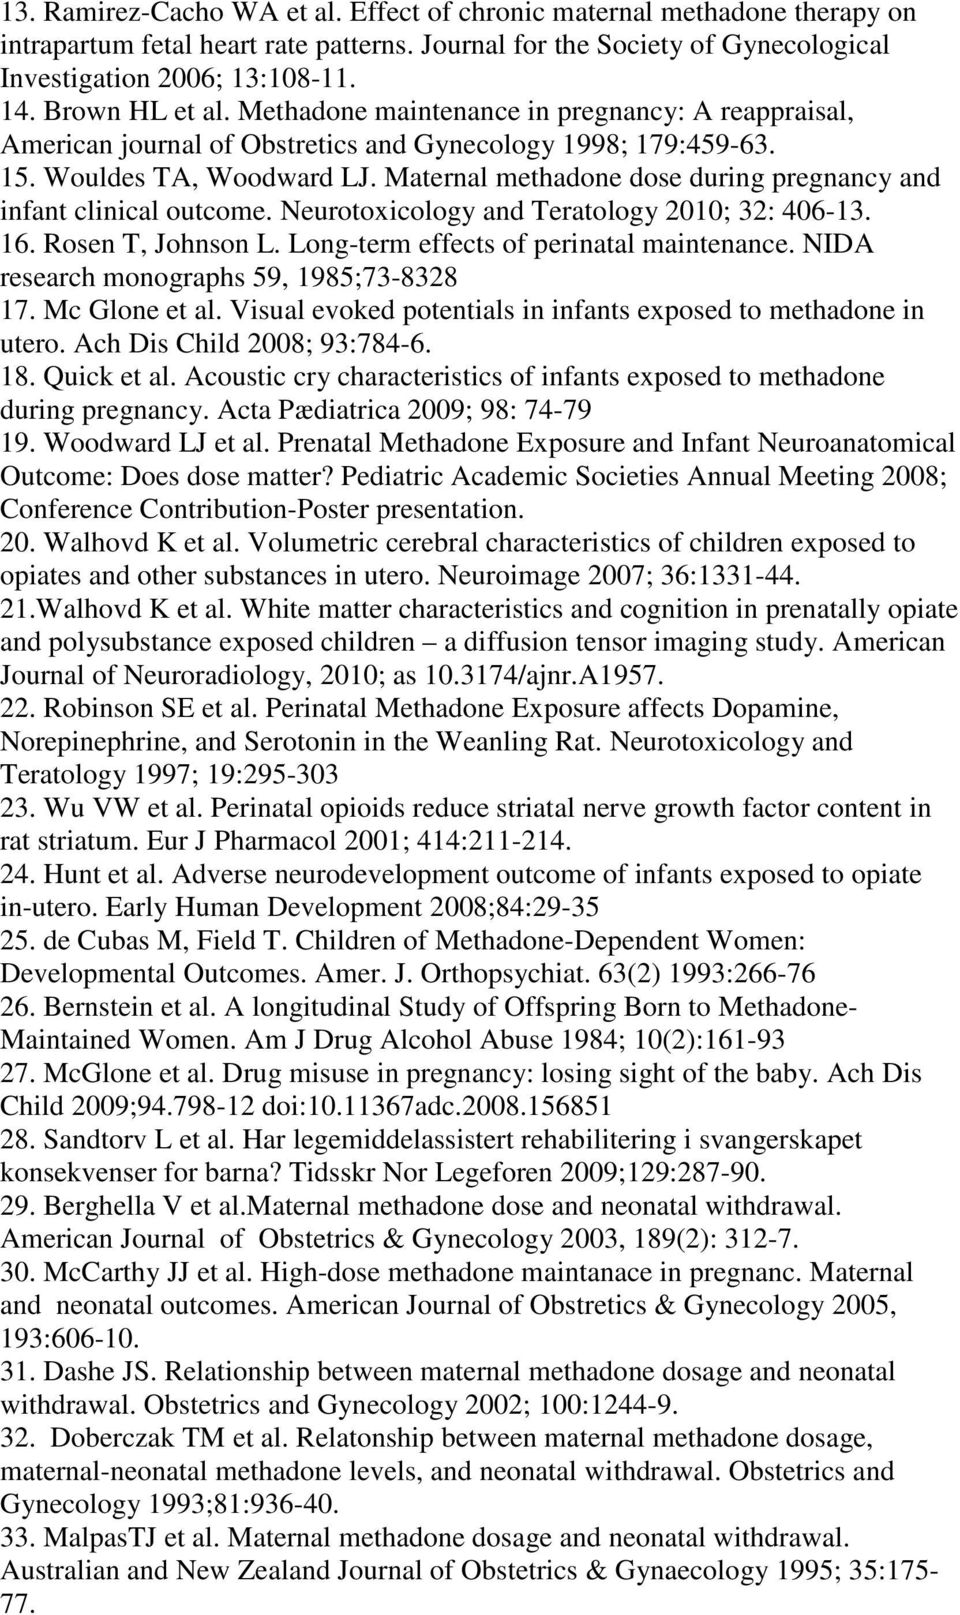 Maternal methadone dose during pregnancy and infant clinical outcome. Neurotoxicology and Teratology 2010; 32: 406-13. 16. Rosen T, Johnson L. Long-term effects of perinatal maintenance.